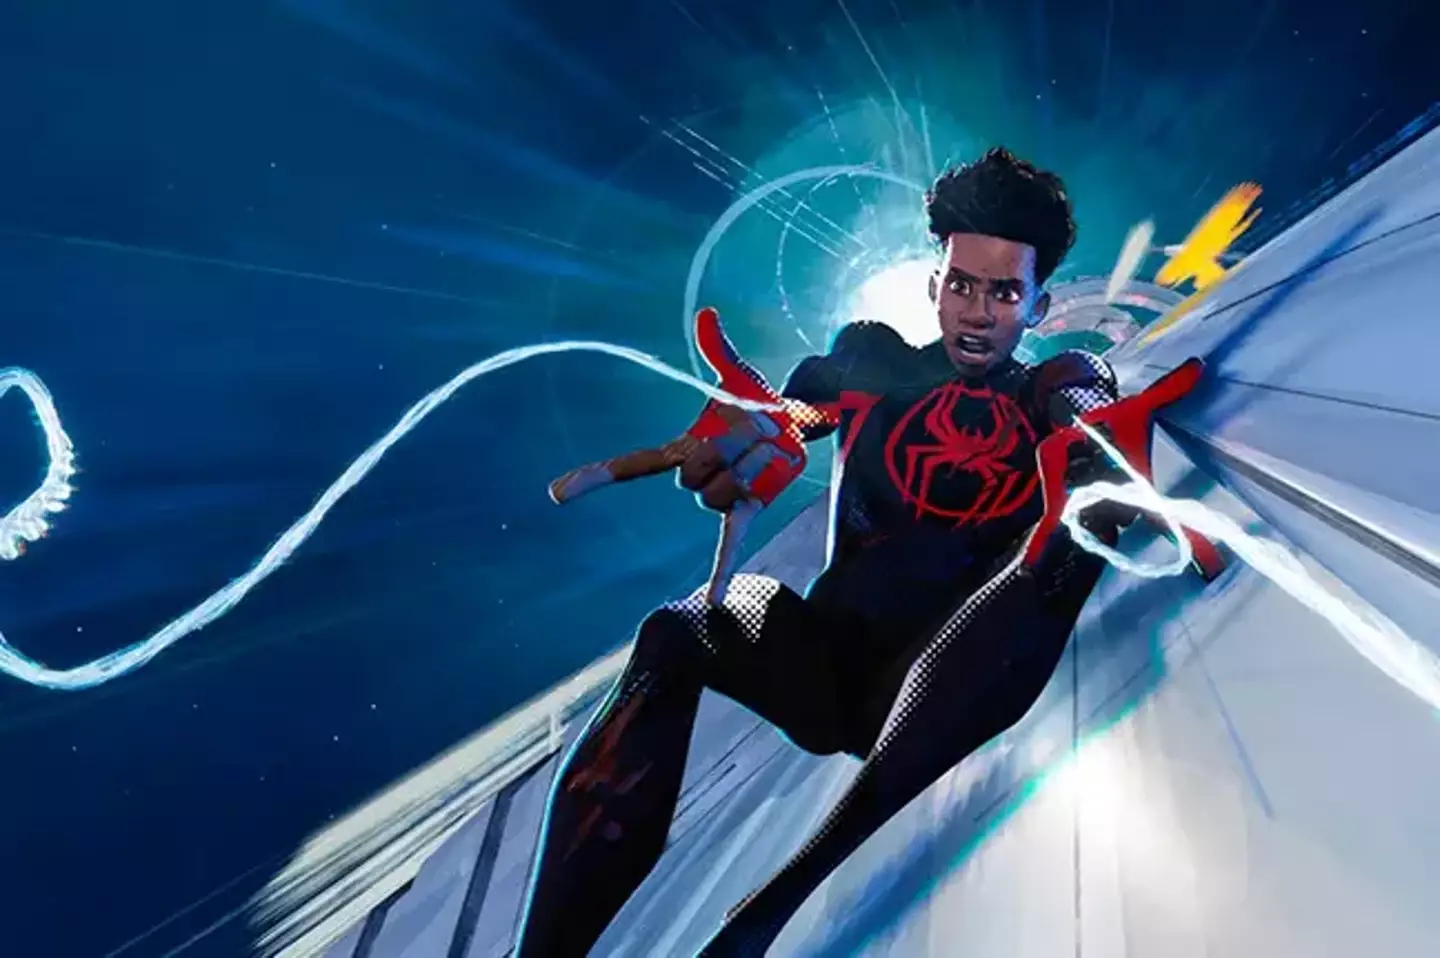 Spider-Man: Across the Spider Verse is a major hit in cinemas but some who worked on it have warned about the conditions they went through.